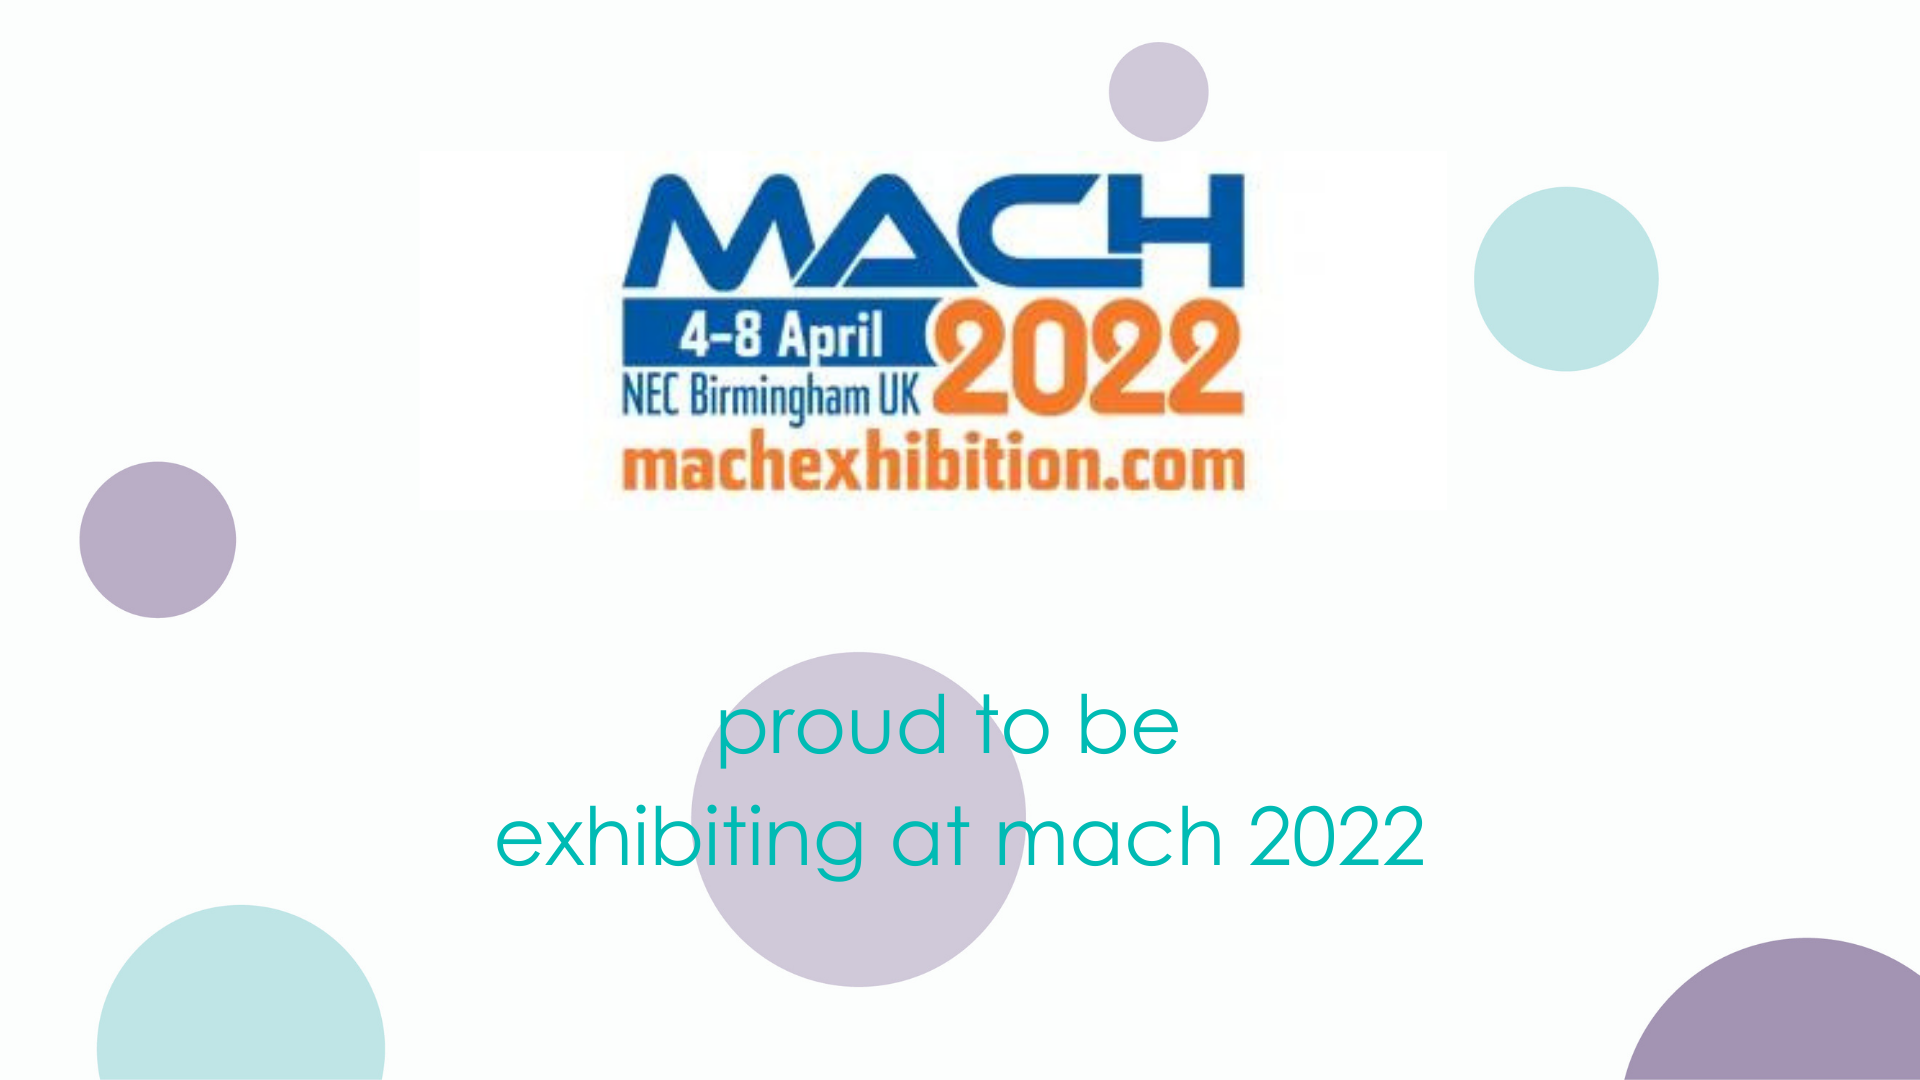 We are exhibiting at MACH 2022